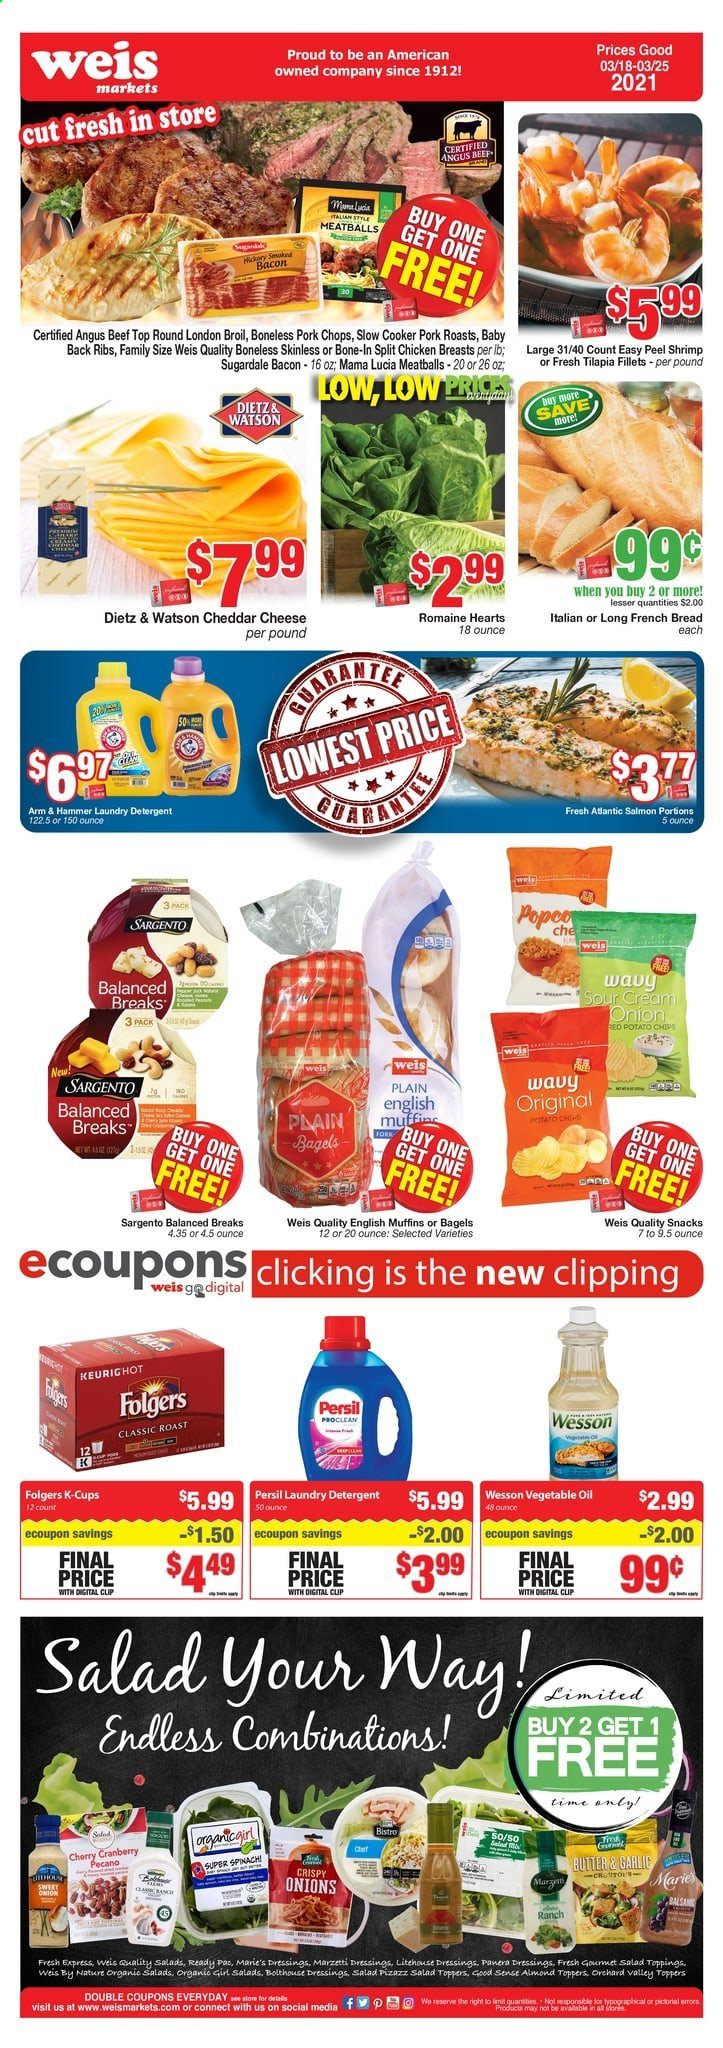 thumbnail - Weis Flyer - 03/18/2021 - 03/25/2021 - Sales products - bread, bagels, muffin, chicken breasts, beef meat, pork chops, pork meat, pork back ribs, salmon, tilapia, shrimps, english muffins, meatballs, bacon, Dietz & Watson, cheddar, cheese, Sargento, butter, sour cream, potato chips, chips, snack, ARM & HAMMER, vegetable oil, almonds, Folgers, coffee capsules, K-Cups, detergent, Persil, laundry detergent. Page 1.